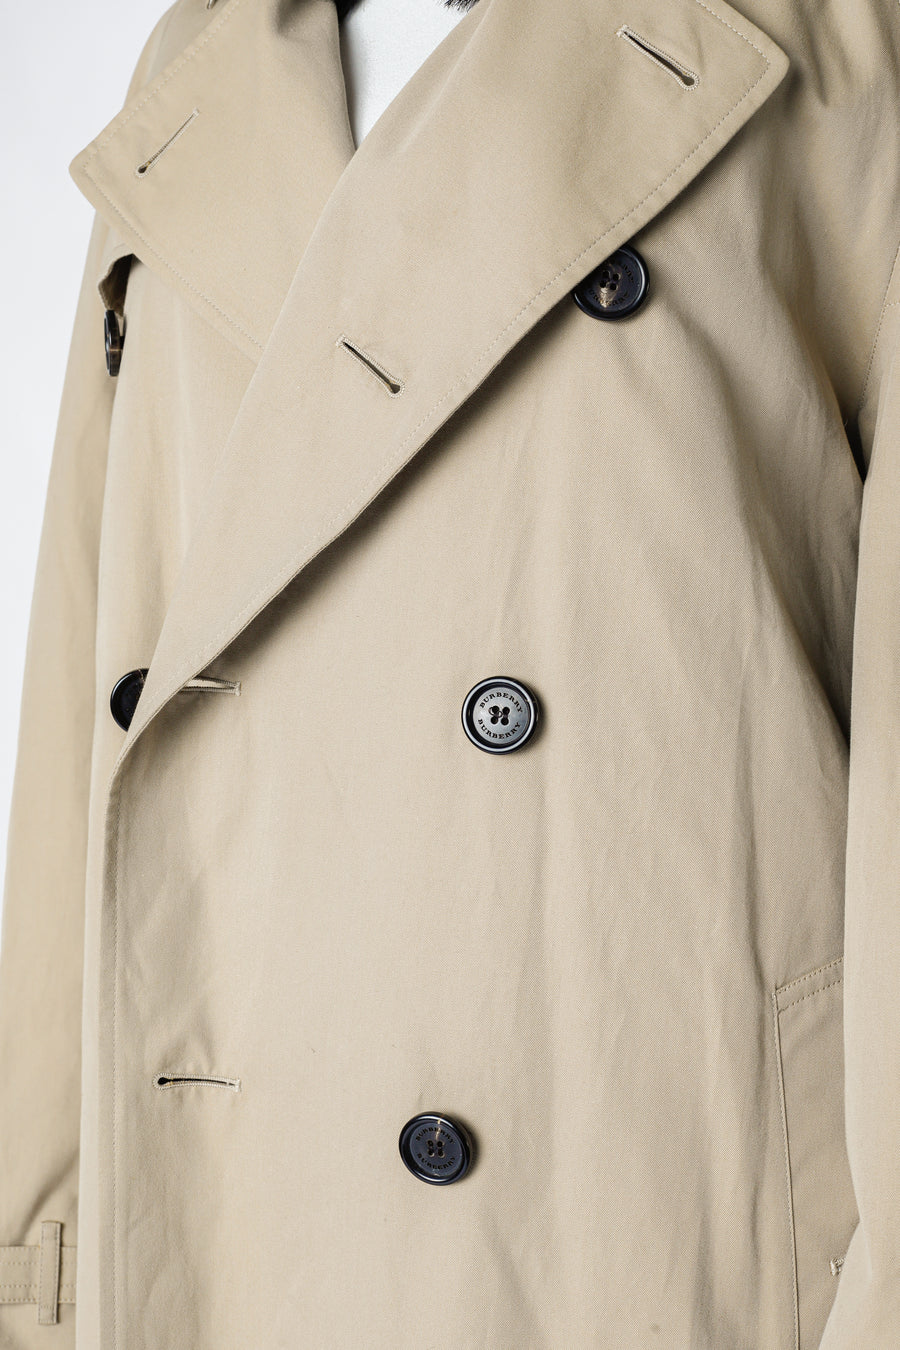 Vintage Burberry Trench Coat - L